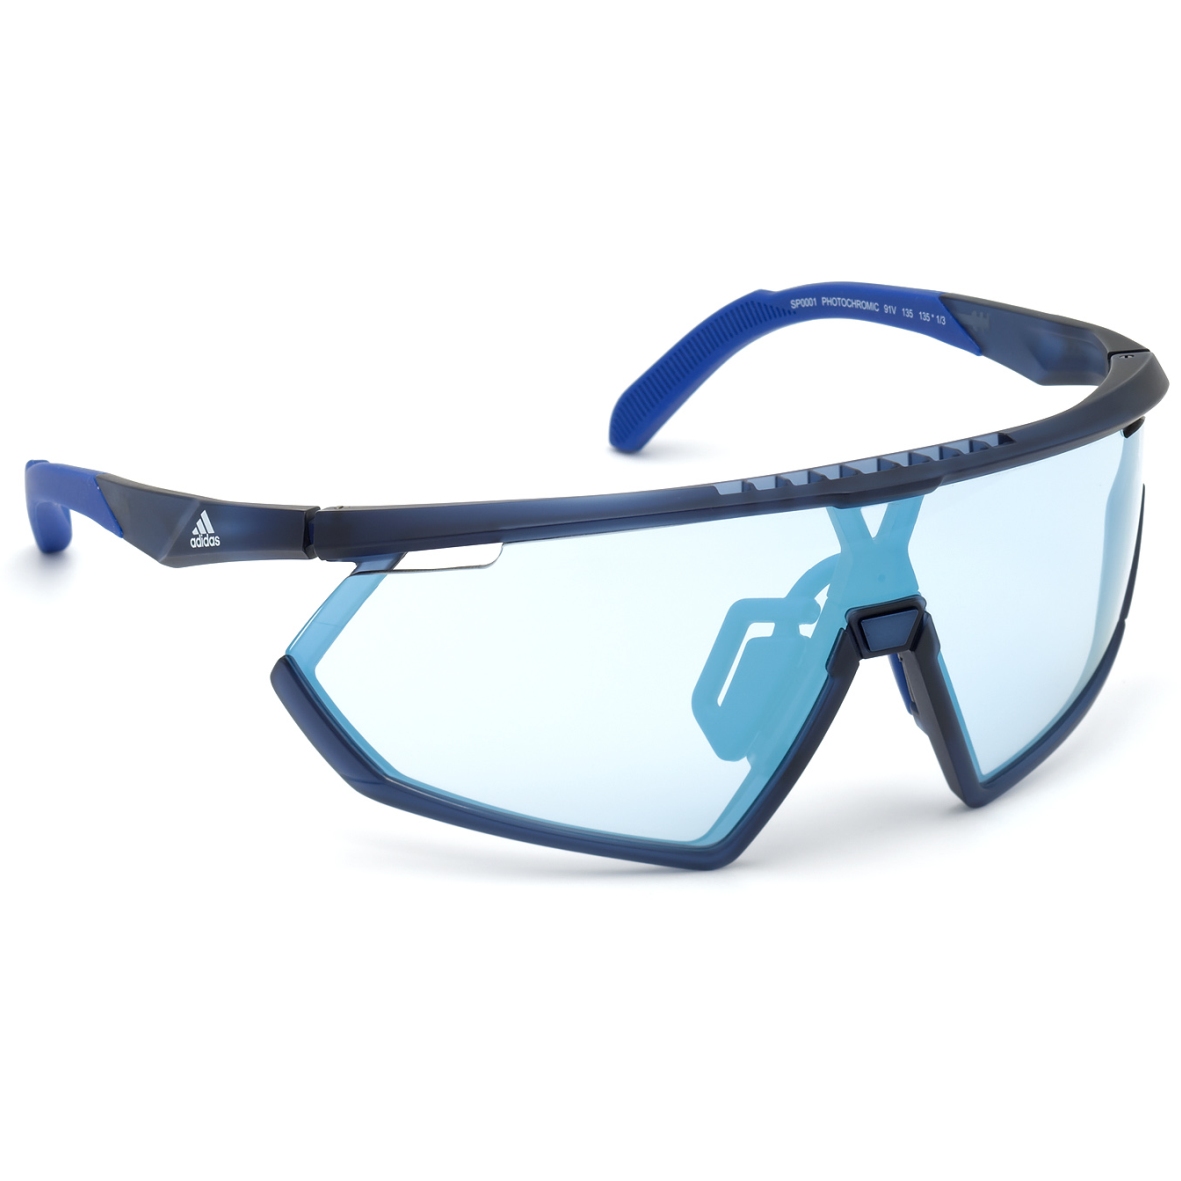 Image of adidas Sp0001 Injected Sport Sunglasses - Frosted Dark Blue / Vario Azure Mirror Blue